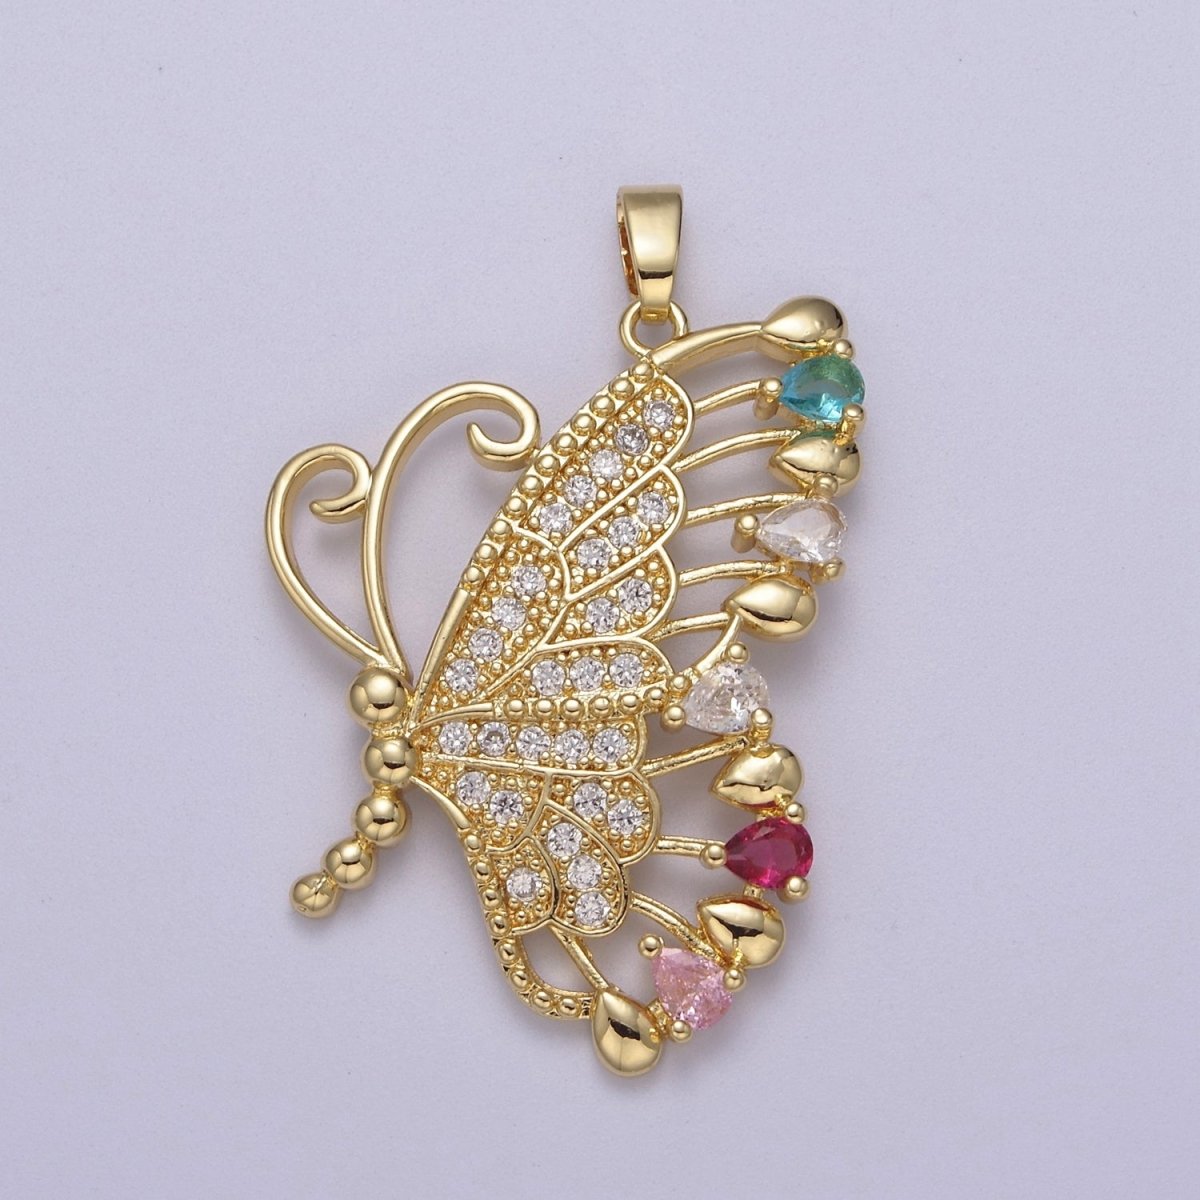 Big CZ Butterfly Pendant 24K Gold Filled Mariposa Charm Necklace Supply J-518 - DLUXCA